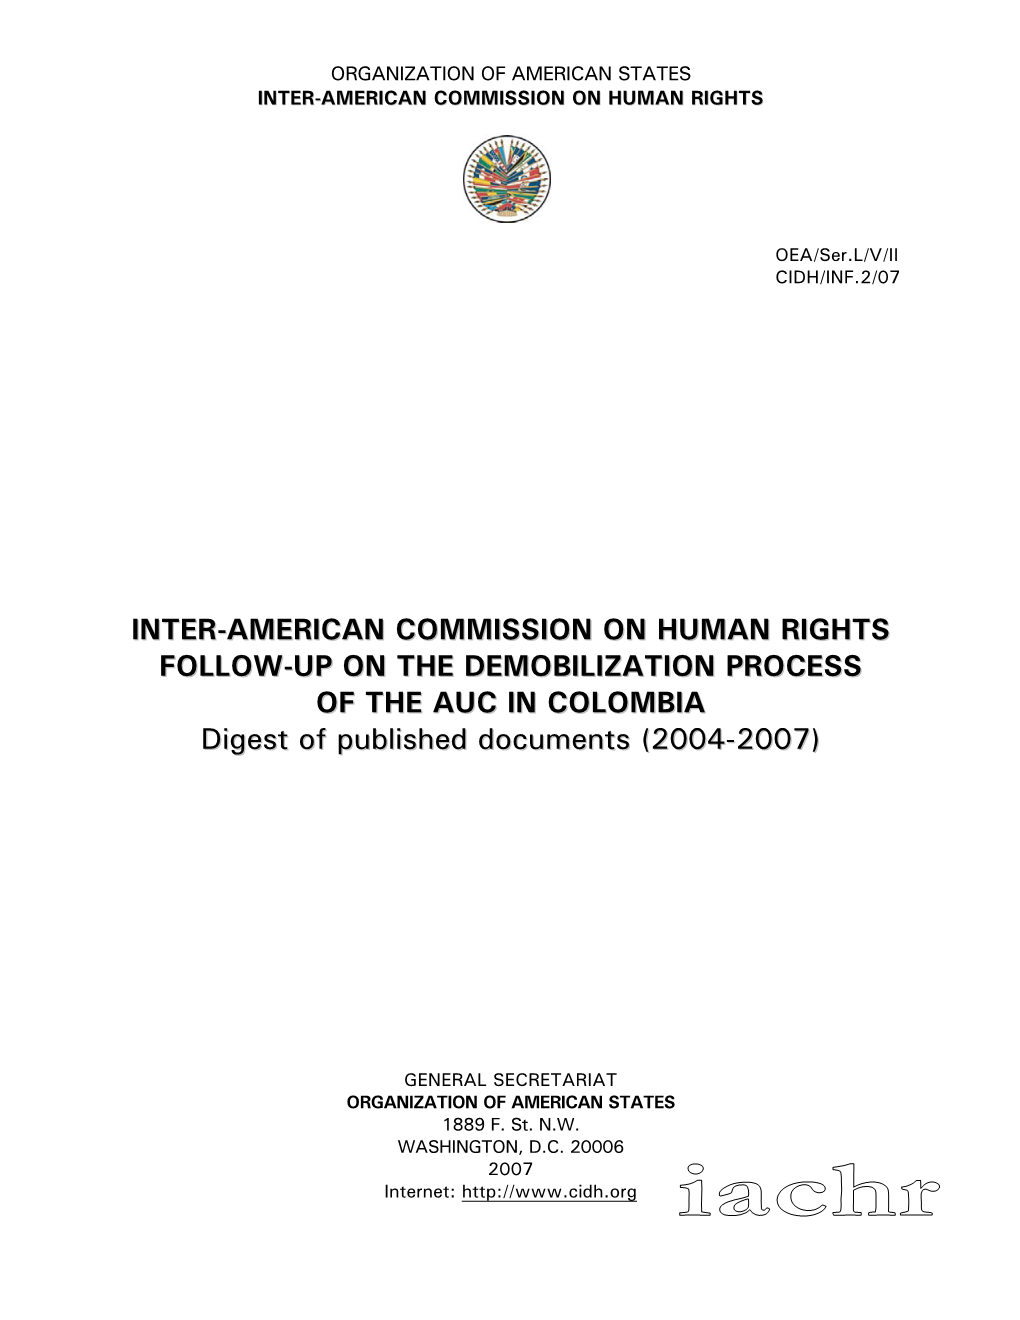 FOLLOW-UP on the DEMOBILIZATION PROCESS of the AUC in COLOMBIA Digest of Published Documents (2004-2007)